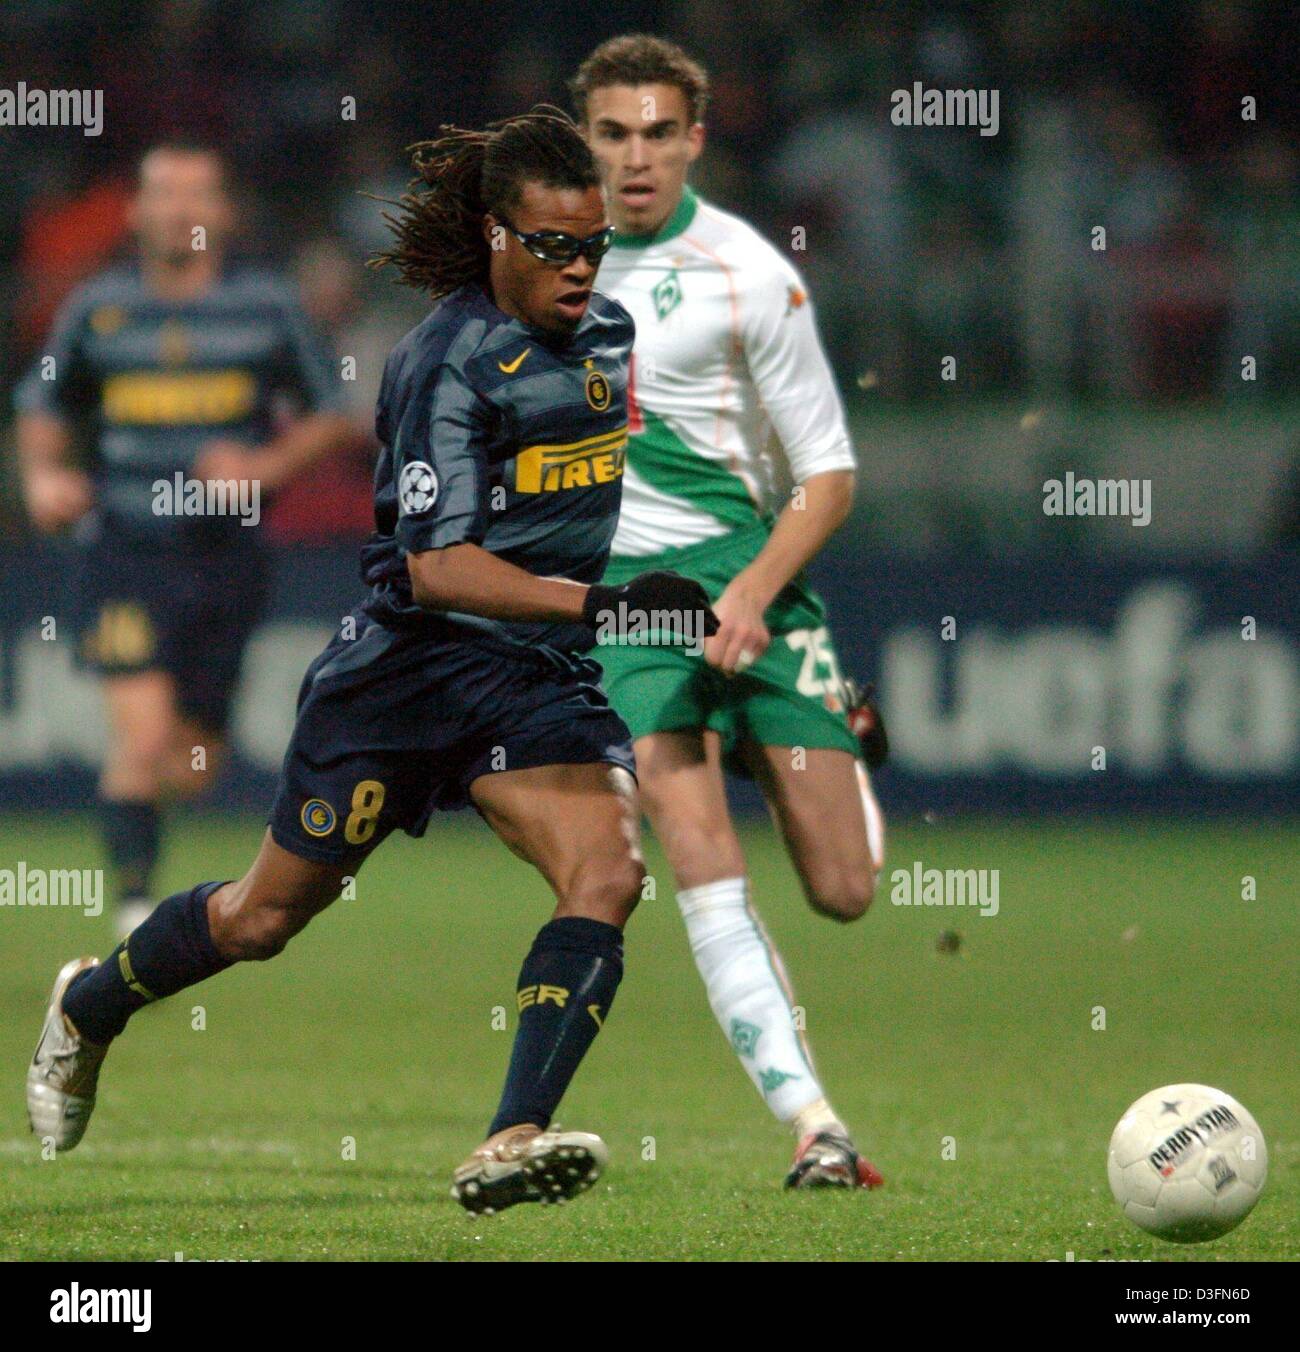 (dpa) - Inter midfielder Edgar Davids (L) gets past Bremen defender Valerien Ismael (R) in the UEFA Champions League match between Werder Bremen and Inter Milan at Weserstadion in Bremen, Germany, 24 November 2004. The game ended in a 1-1 draw. Inter is already qualified for the next round while Bremen still needs to secure a spot in their last group game against Spain's FC Valenci Stock Photo